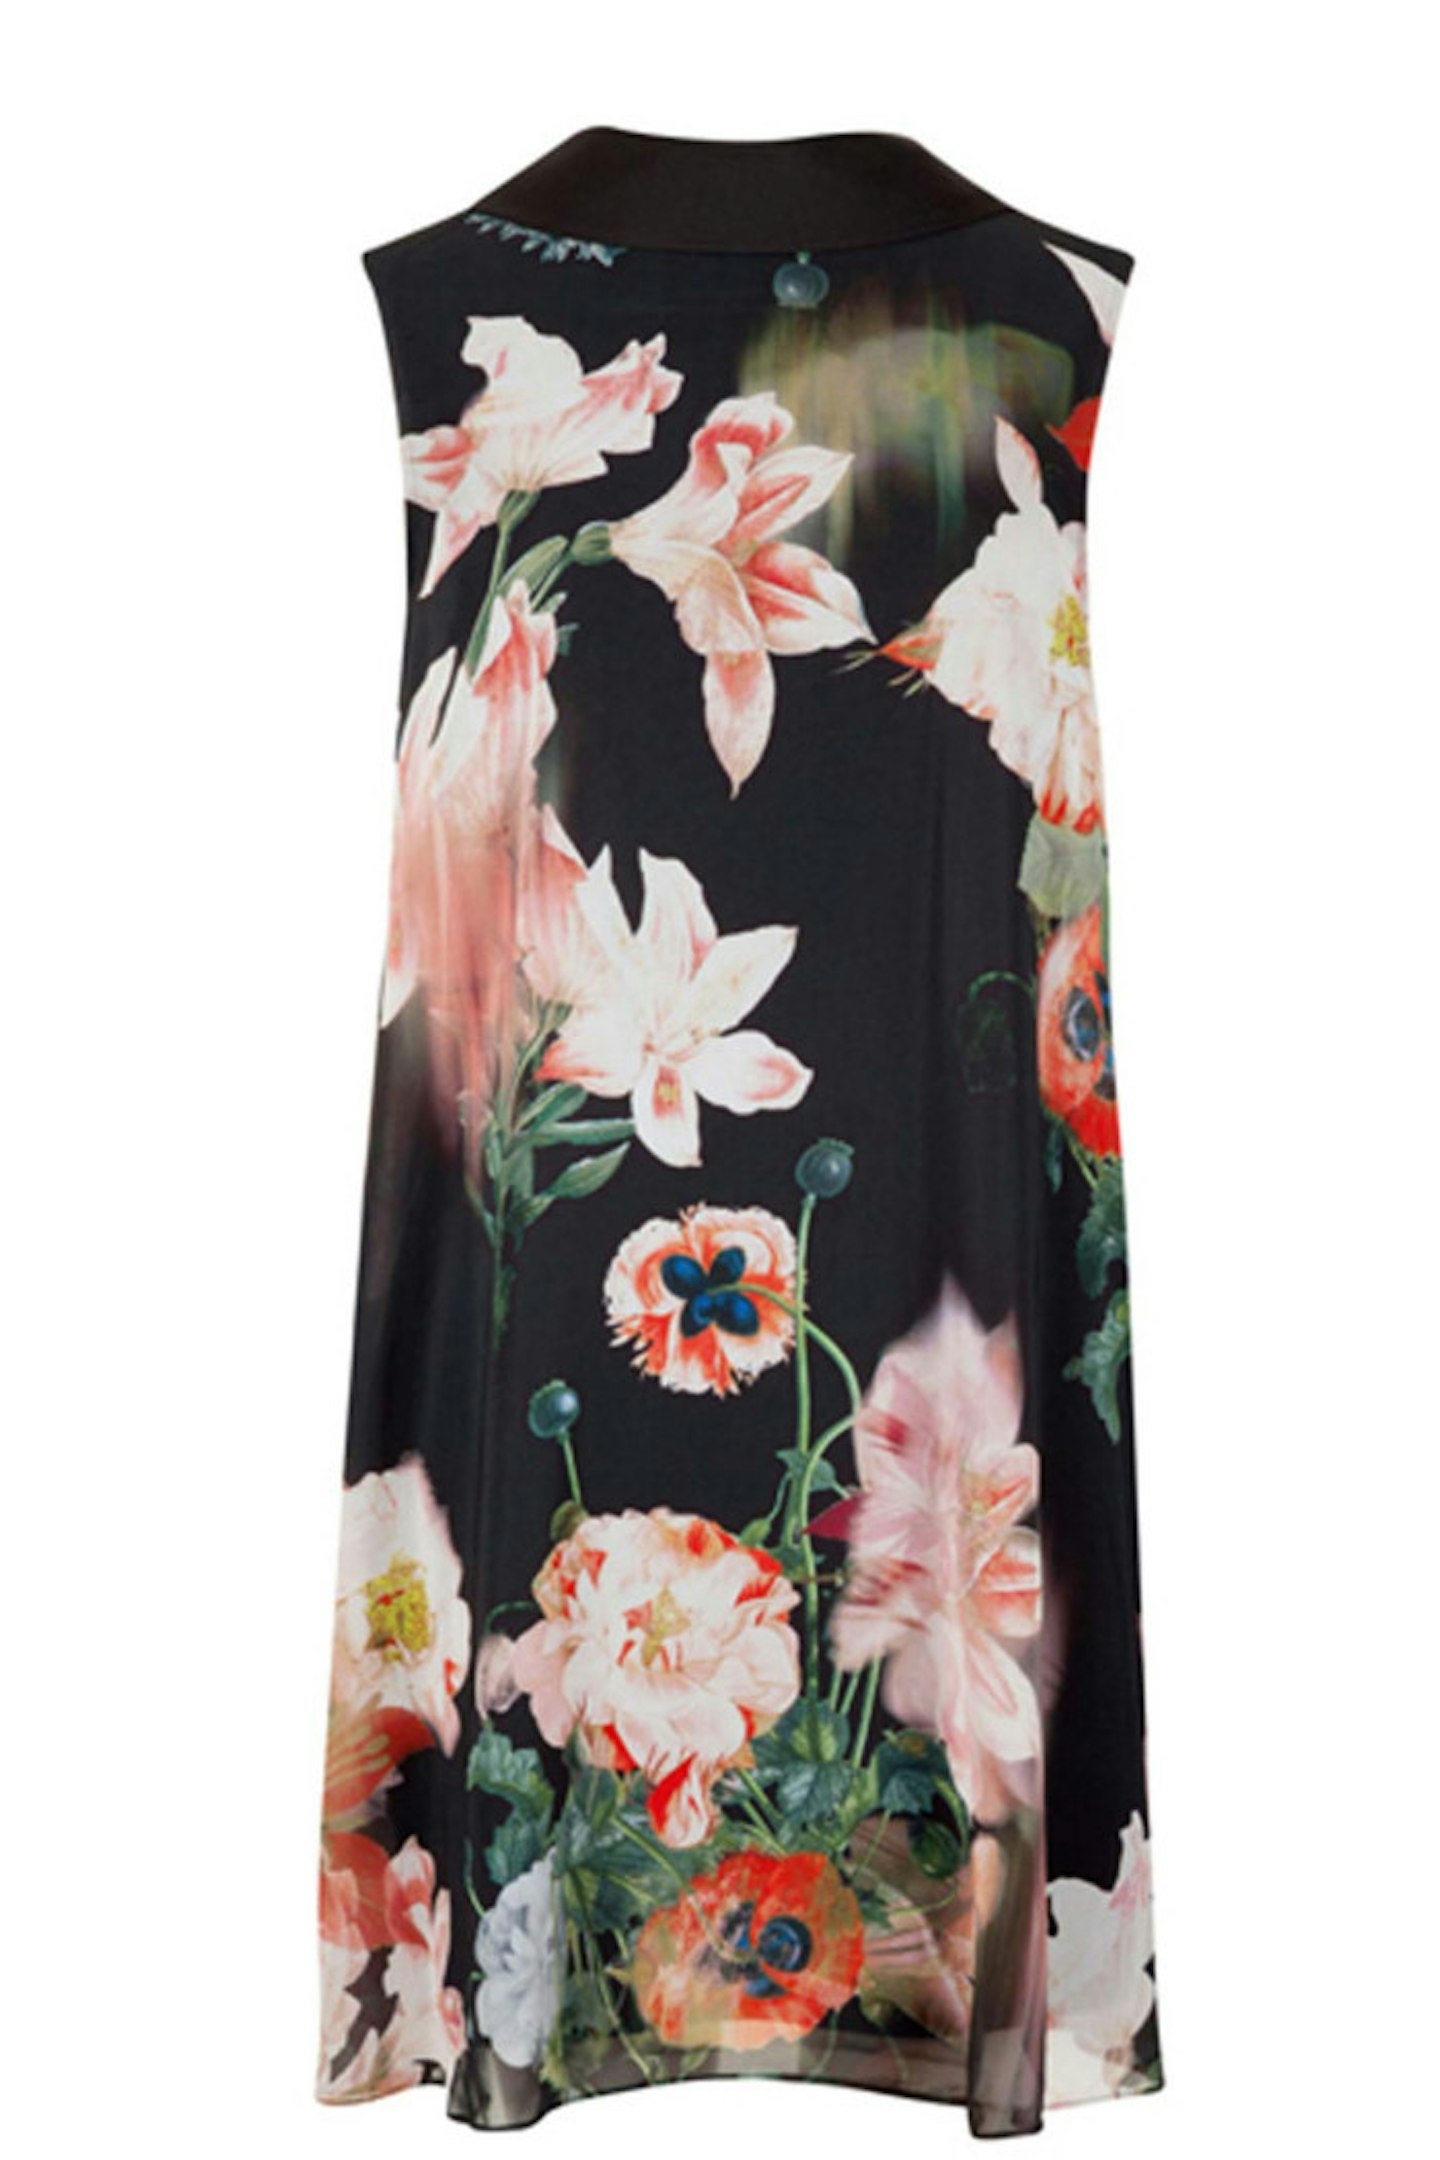 28. Bloom Printed Reversible Tunic, £159, Ted Baker